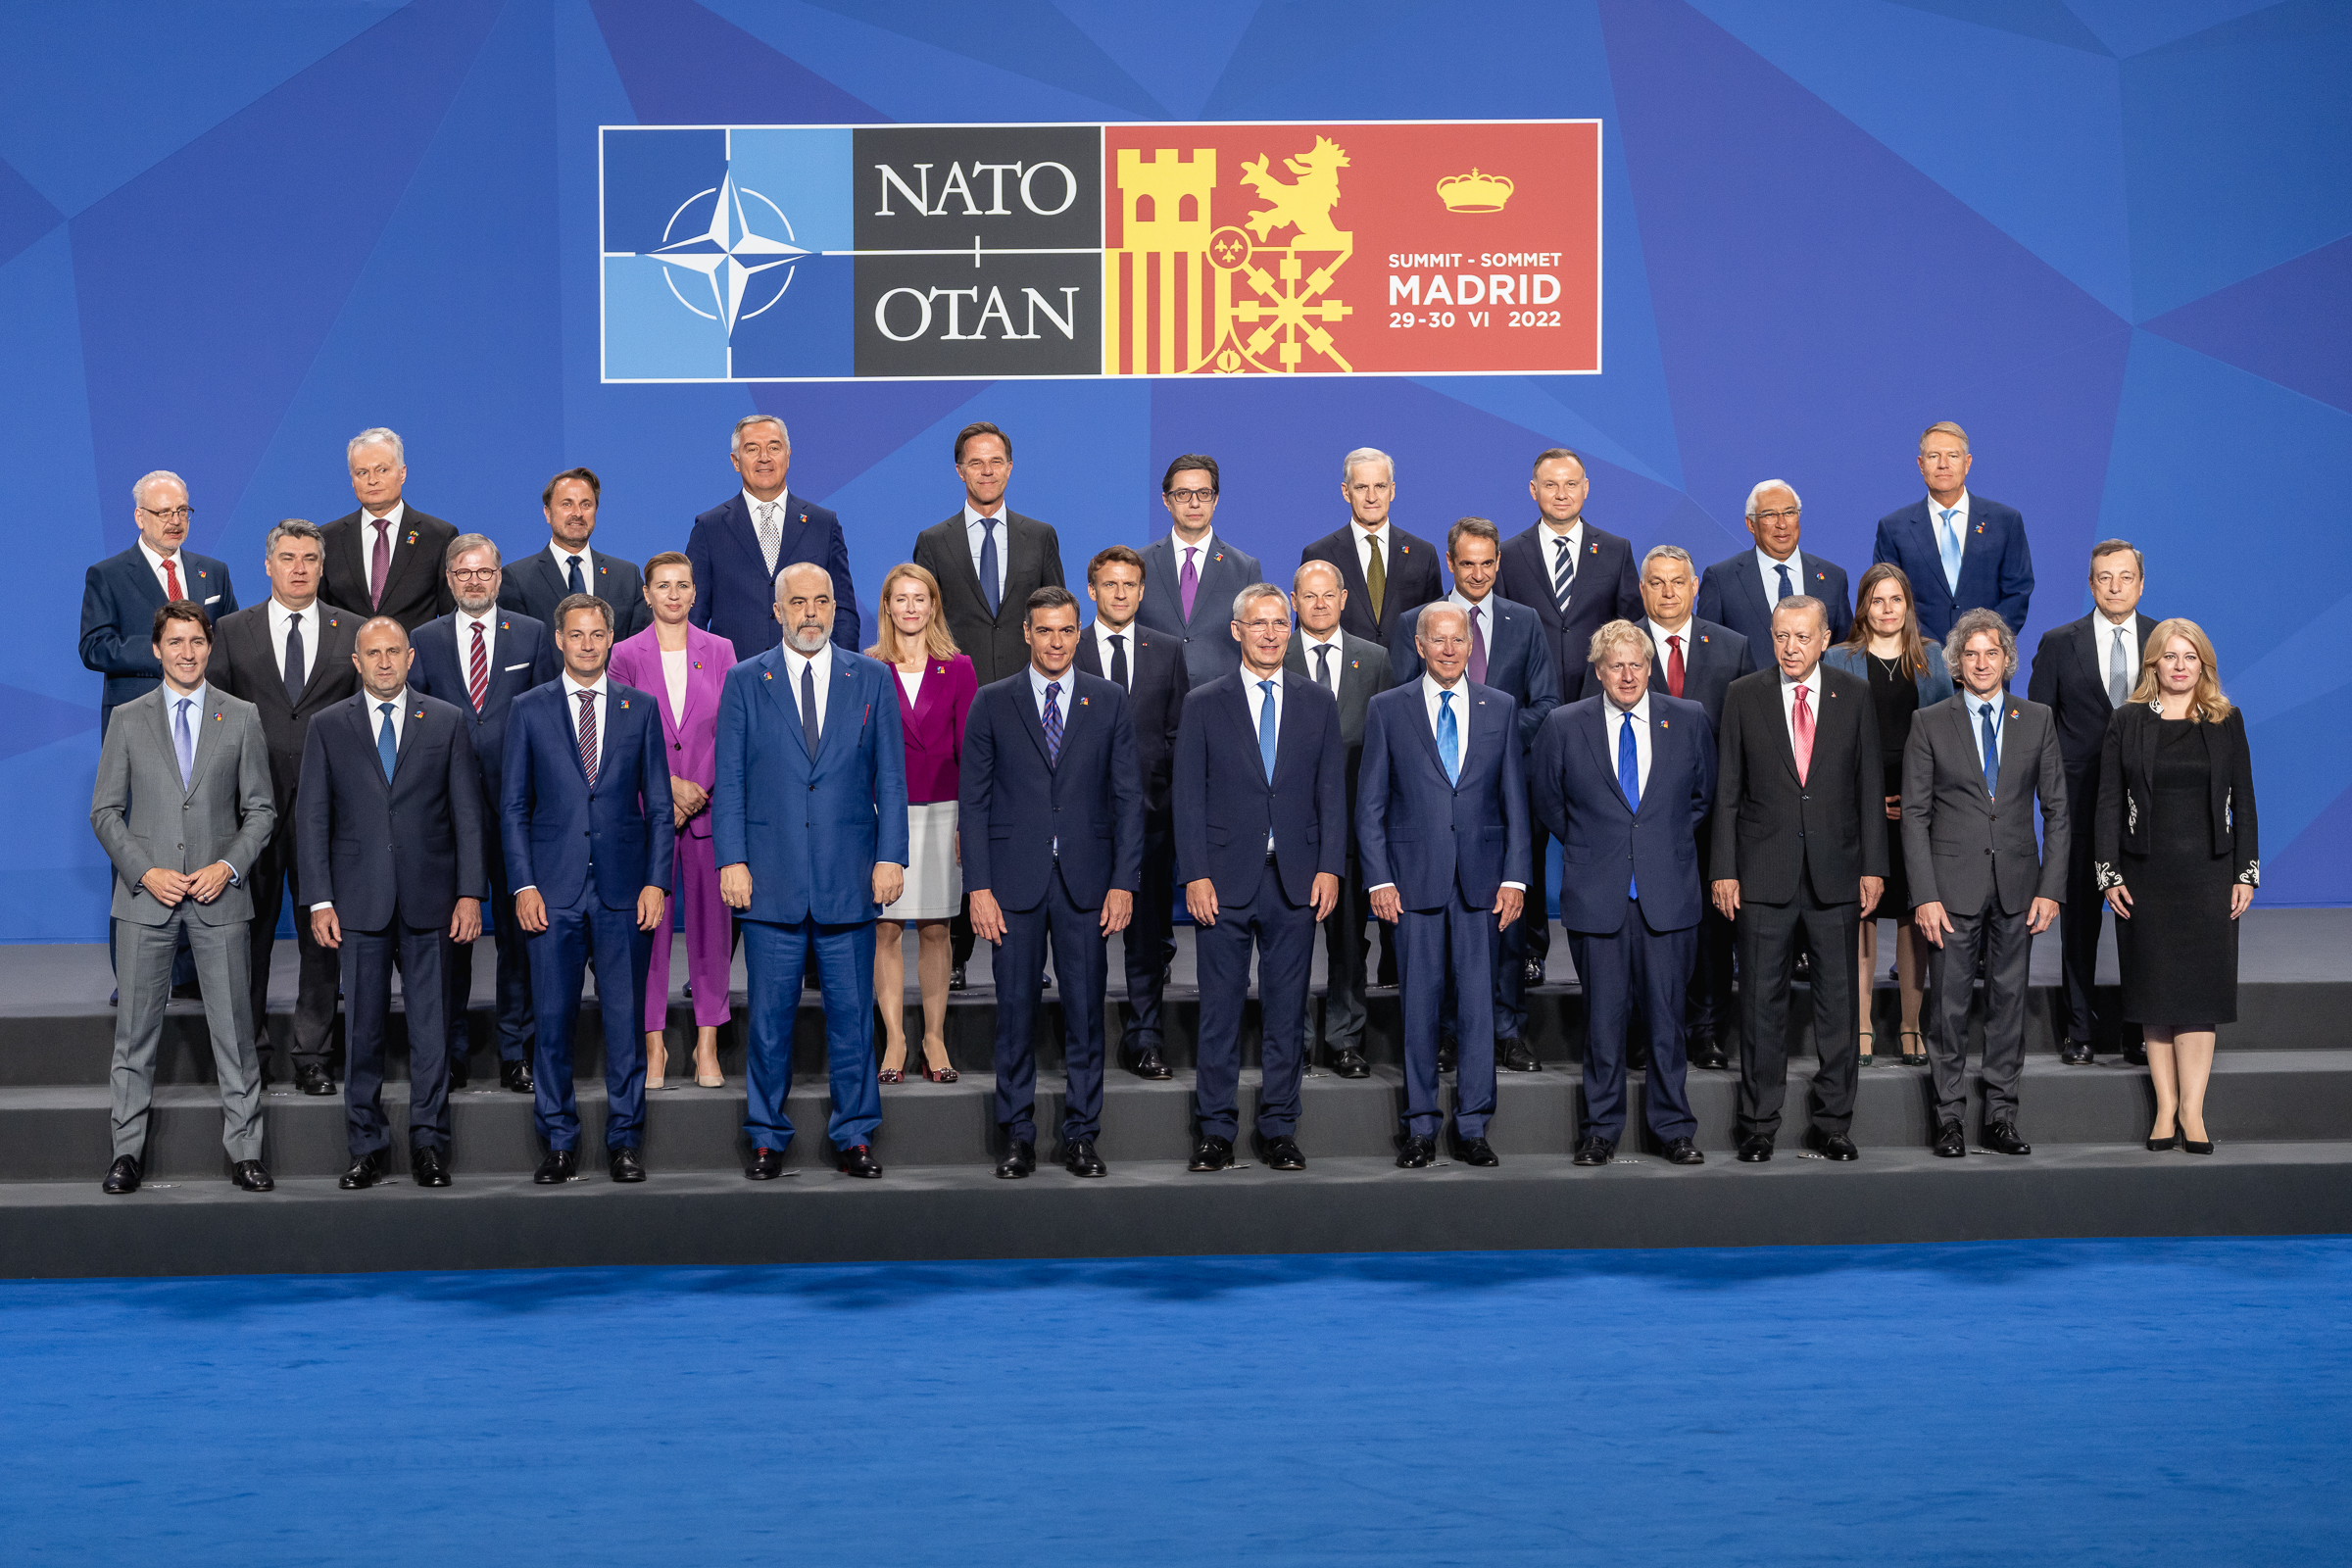 Key Takeaways from the 2022 NATO-summit in Madrid